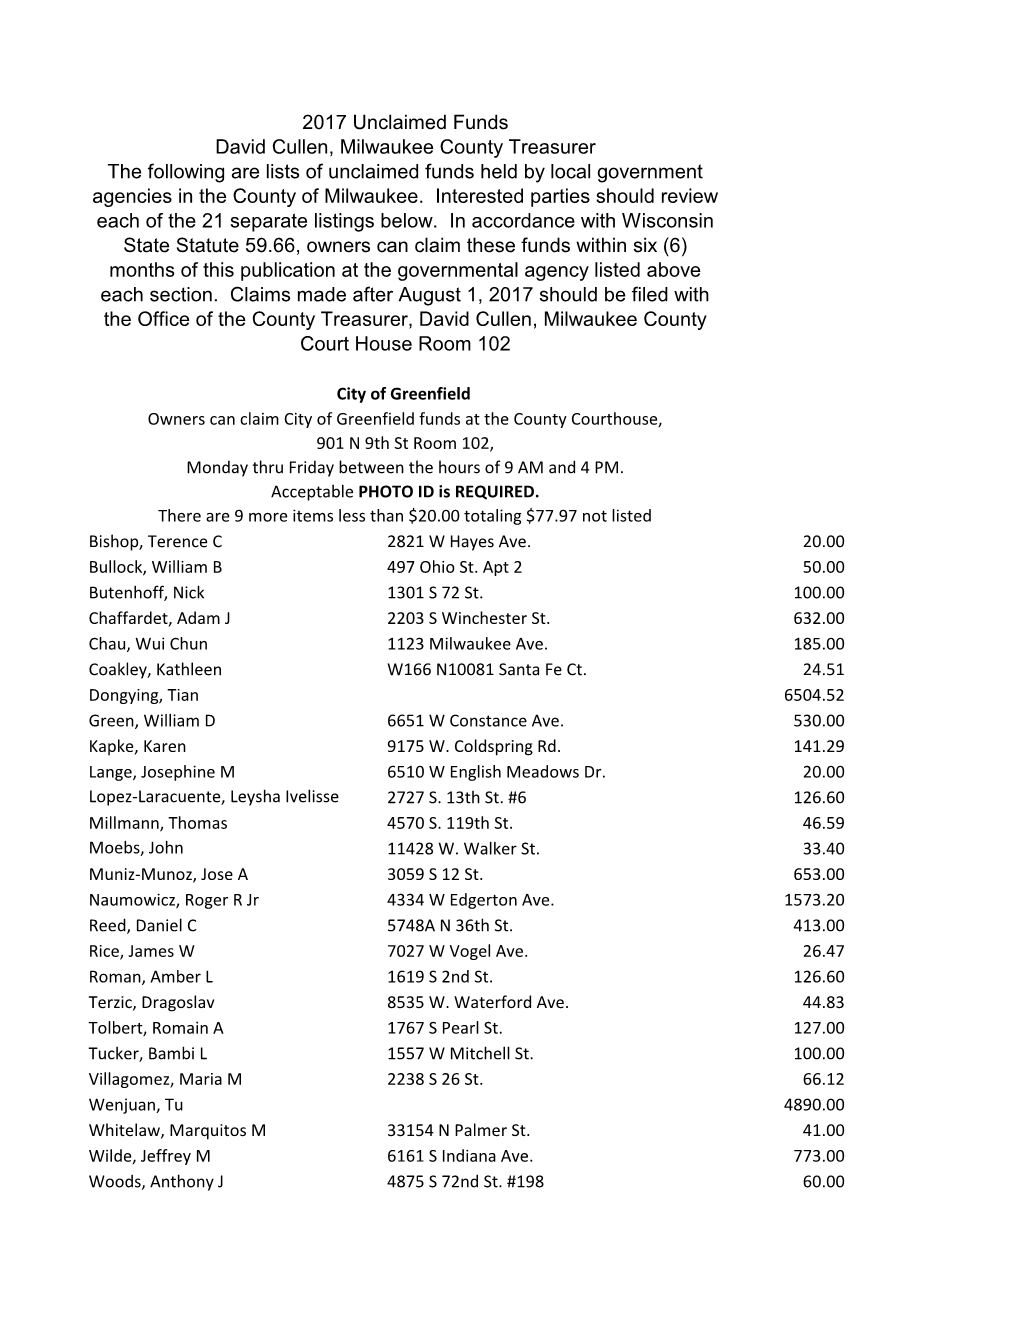 2017 Unclaimed Funds David Cullen, Milwaukee County Treasurer the Following Are Lists of Unclaimed Funds Held by Local Government Agencies in the County of Milwaukee